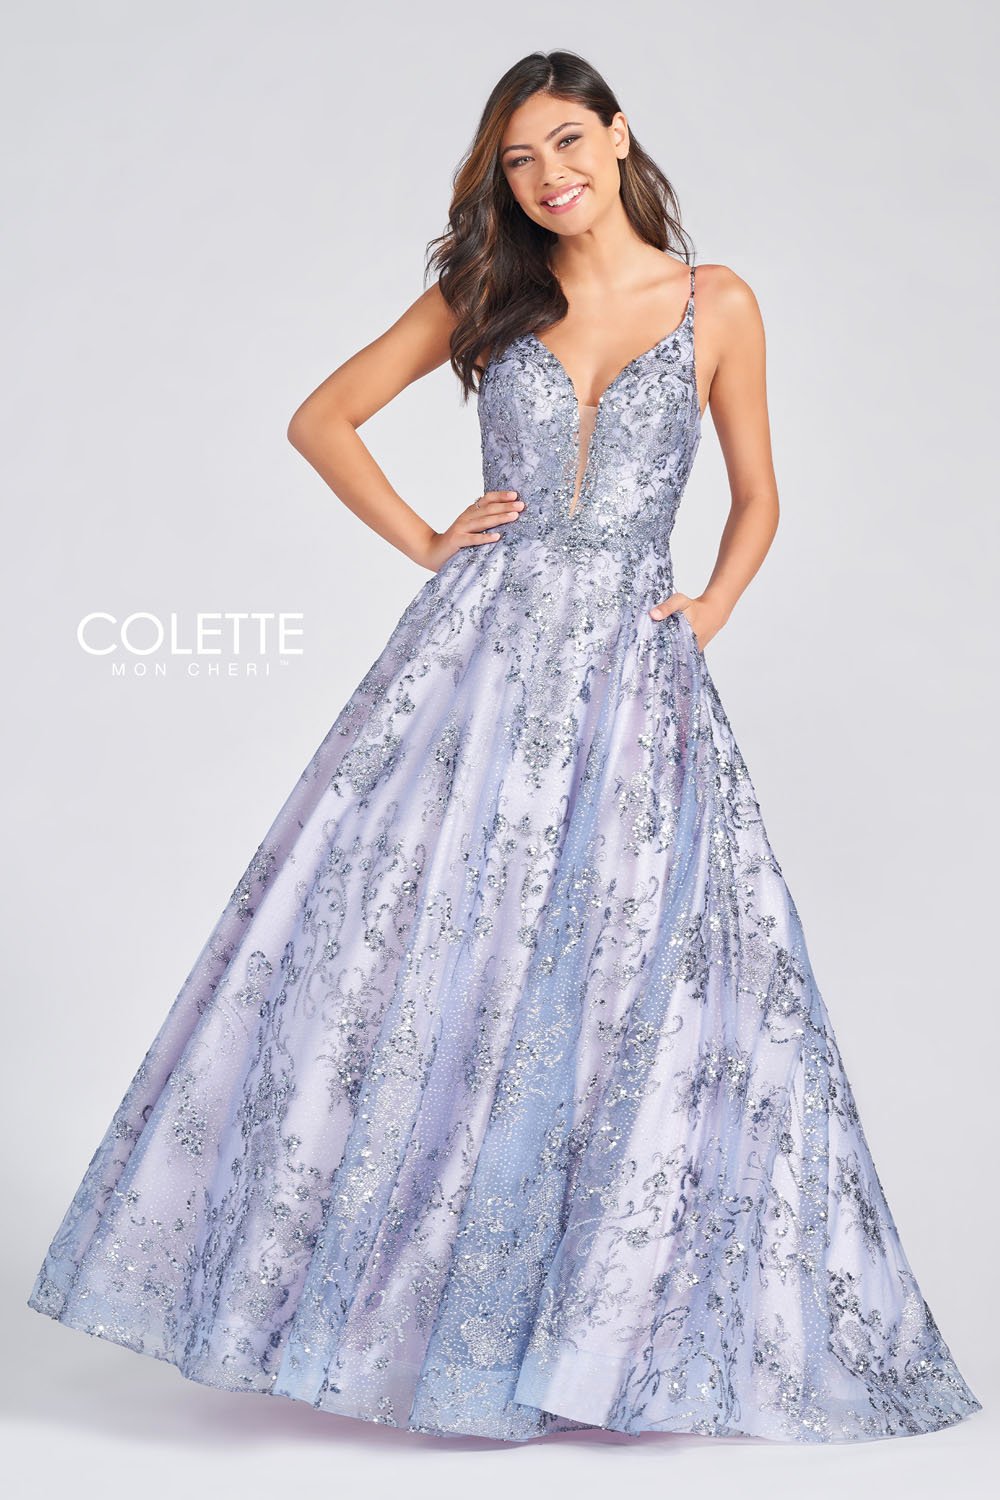 Colette CL12259 Dusty Lilac prom dresses.  Dusty Lilac prom dresses image by Colette.